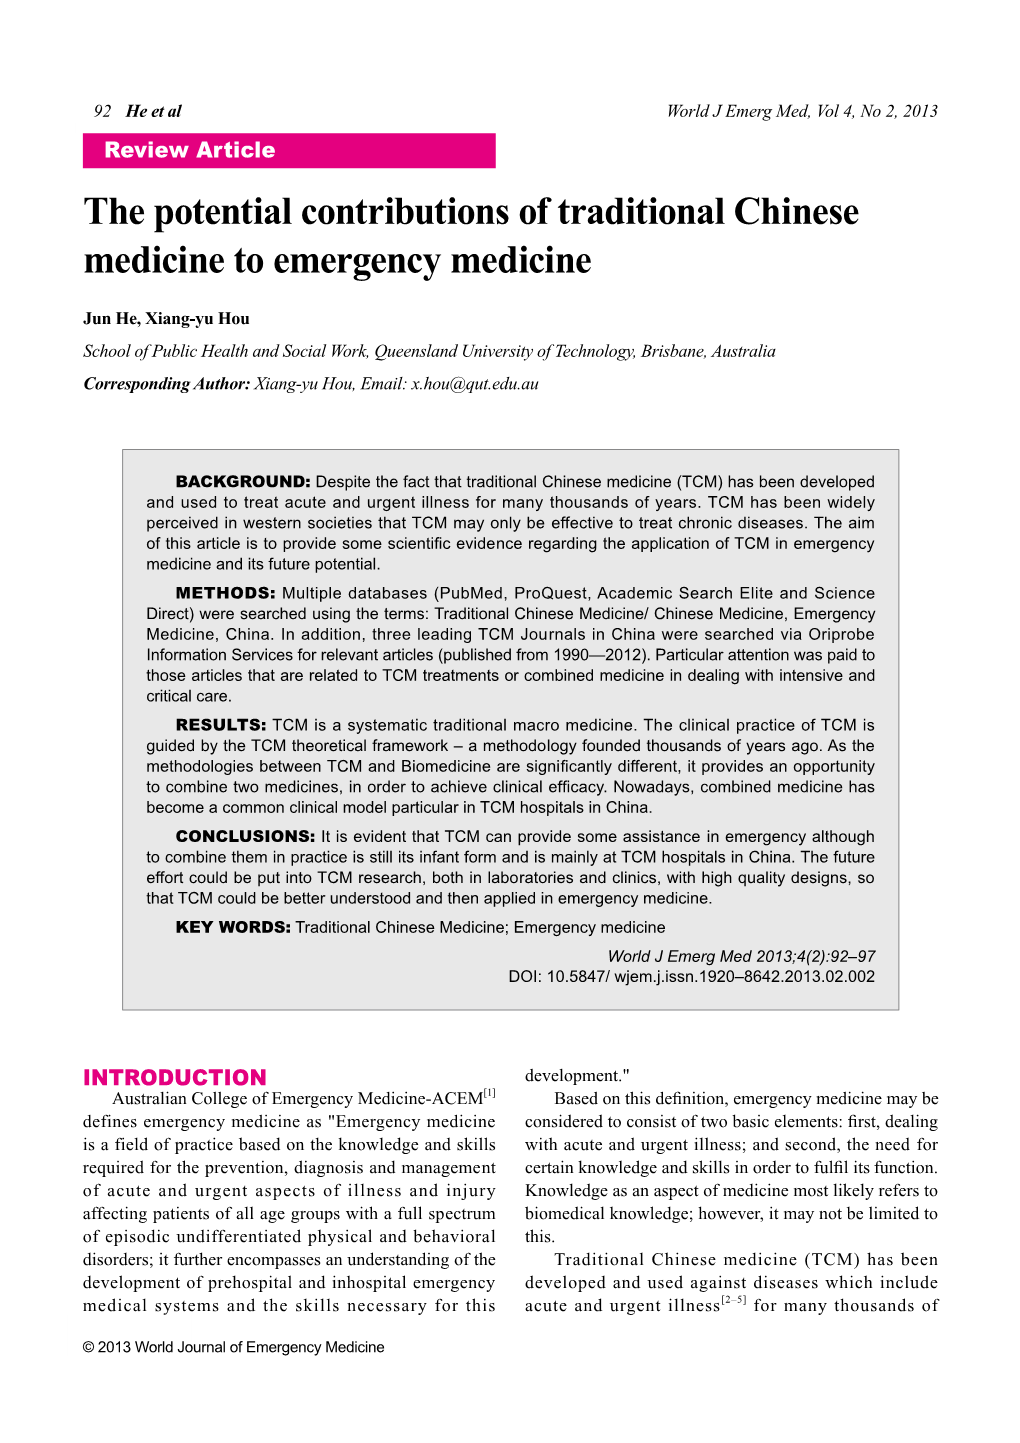 The Potential Contributions of Traditional Chinese Medicine to Emergency Medicine